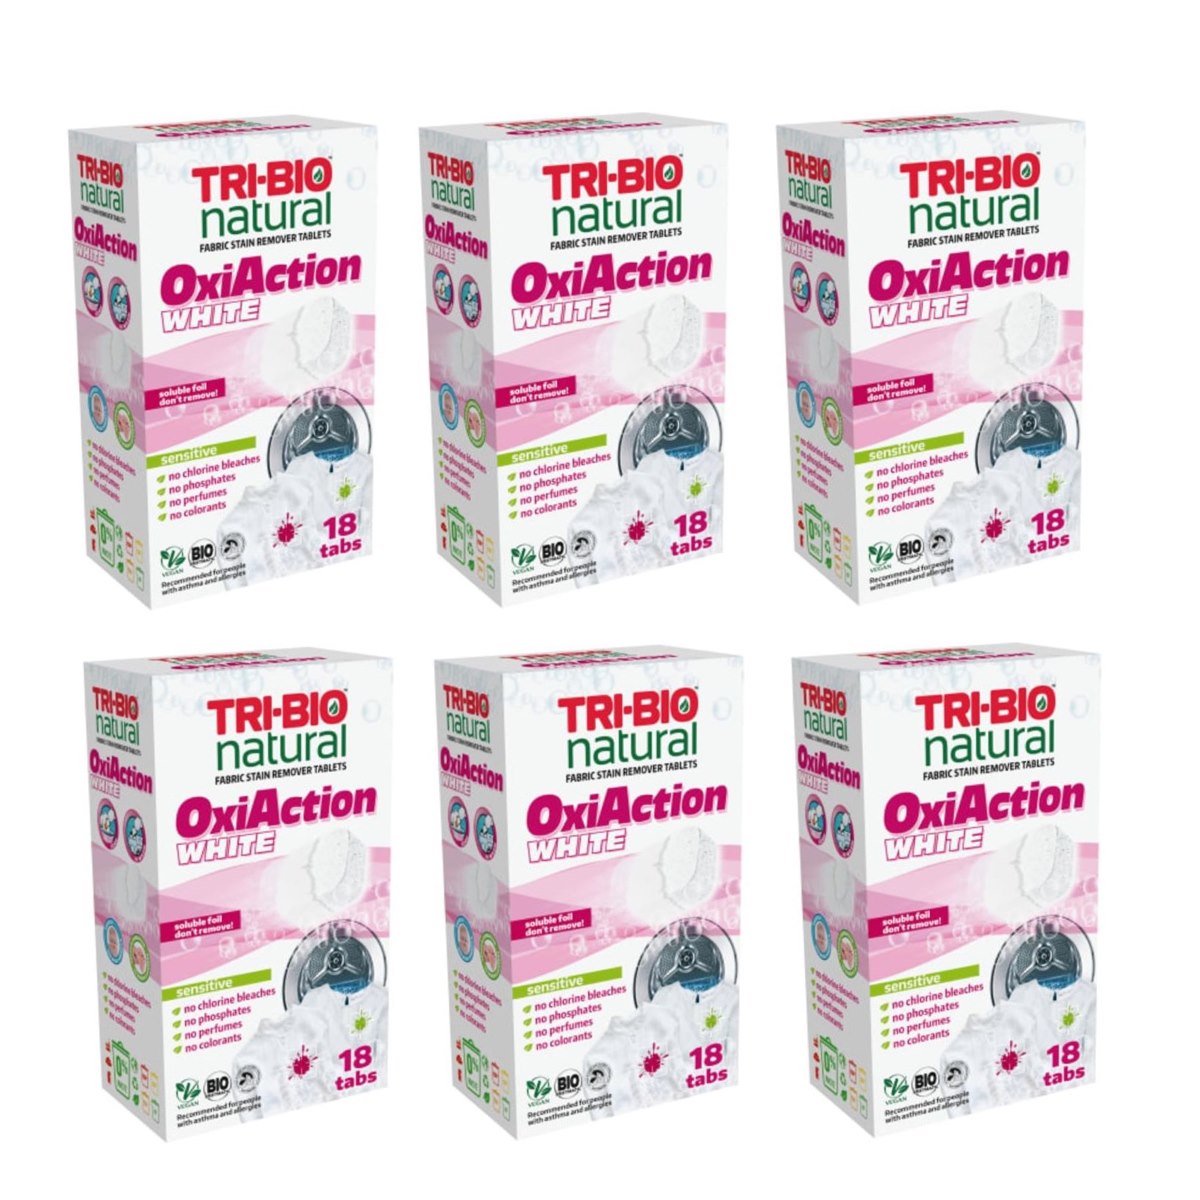 Case of 6 x TRI-BIO OxiAction Fabric Stain Remover Tablets (18) White